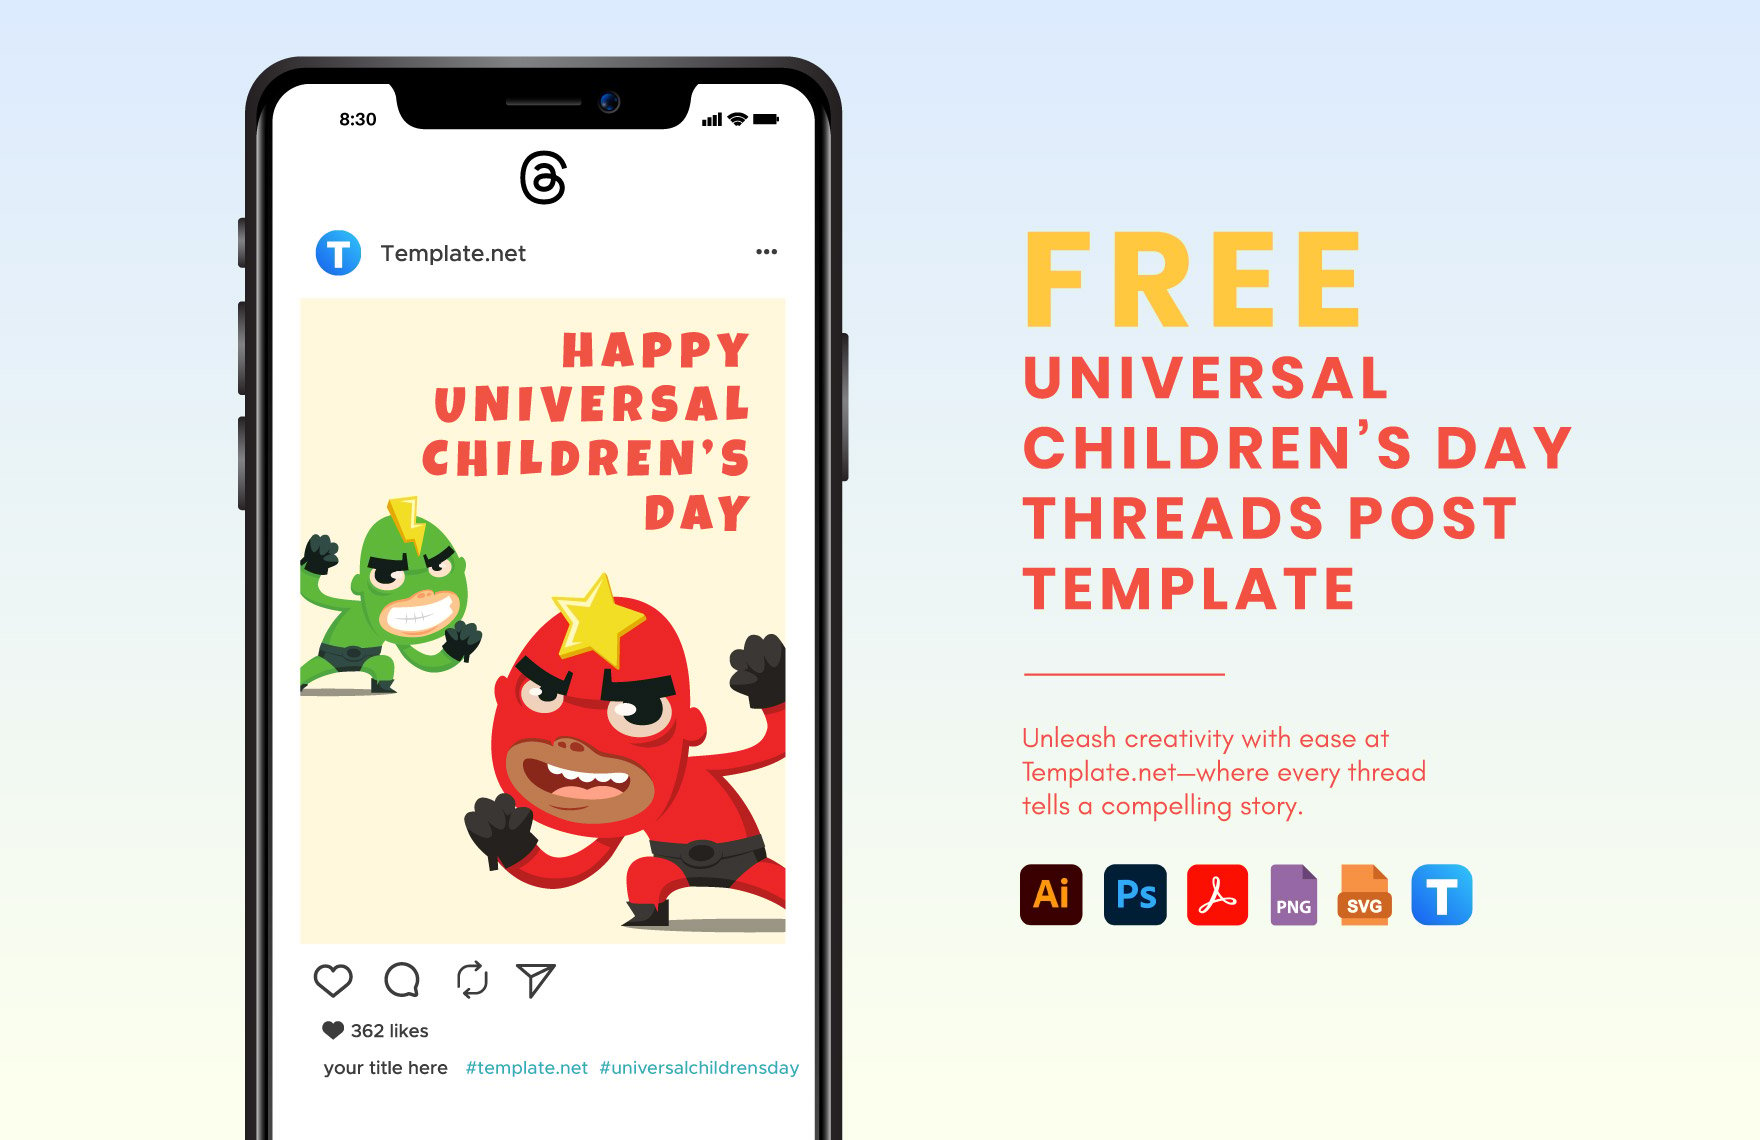 Free Universal Children’s Day Threads Post Template in PDF, Illustrator, PSD, SVG, PNG